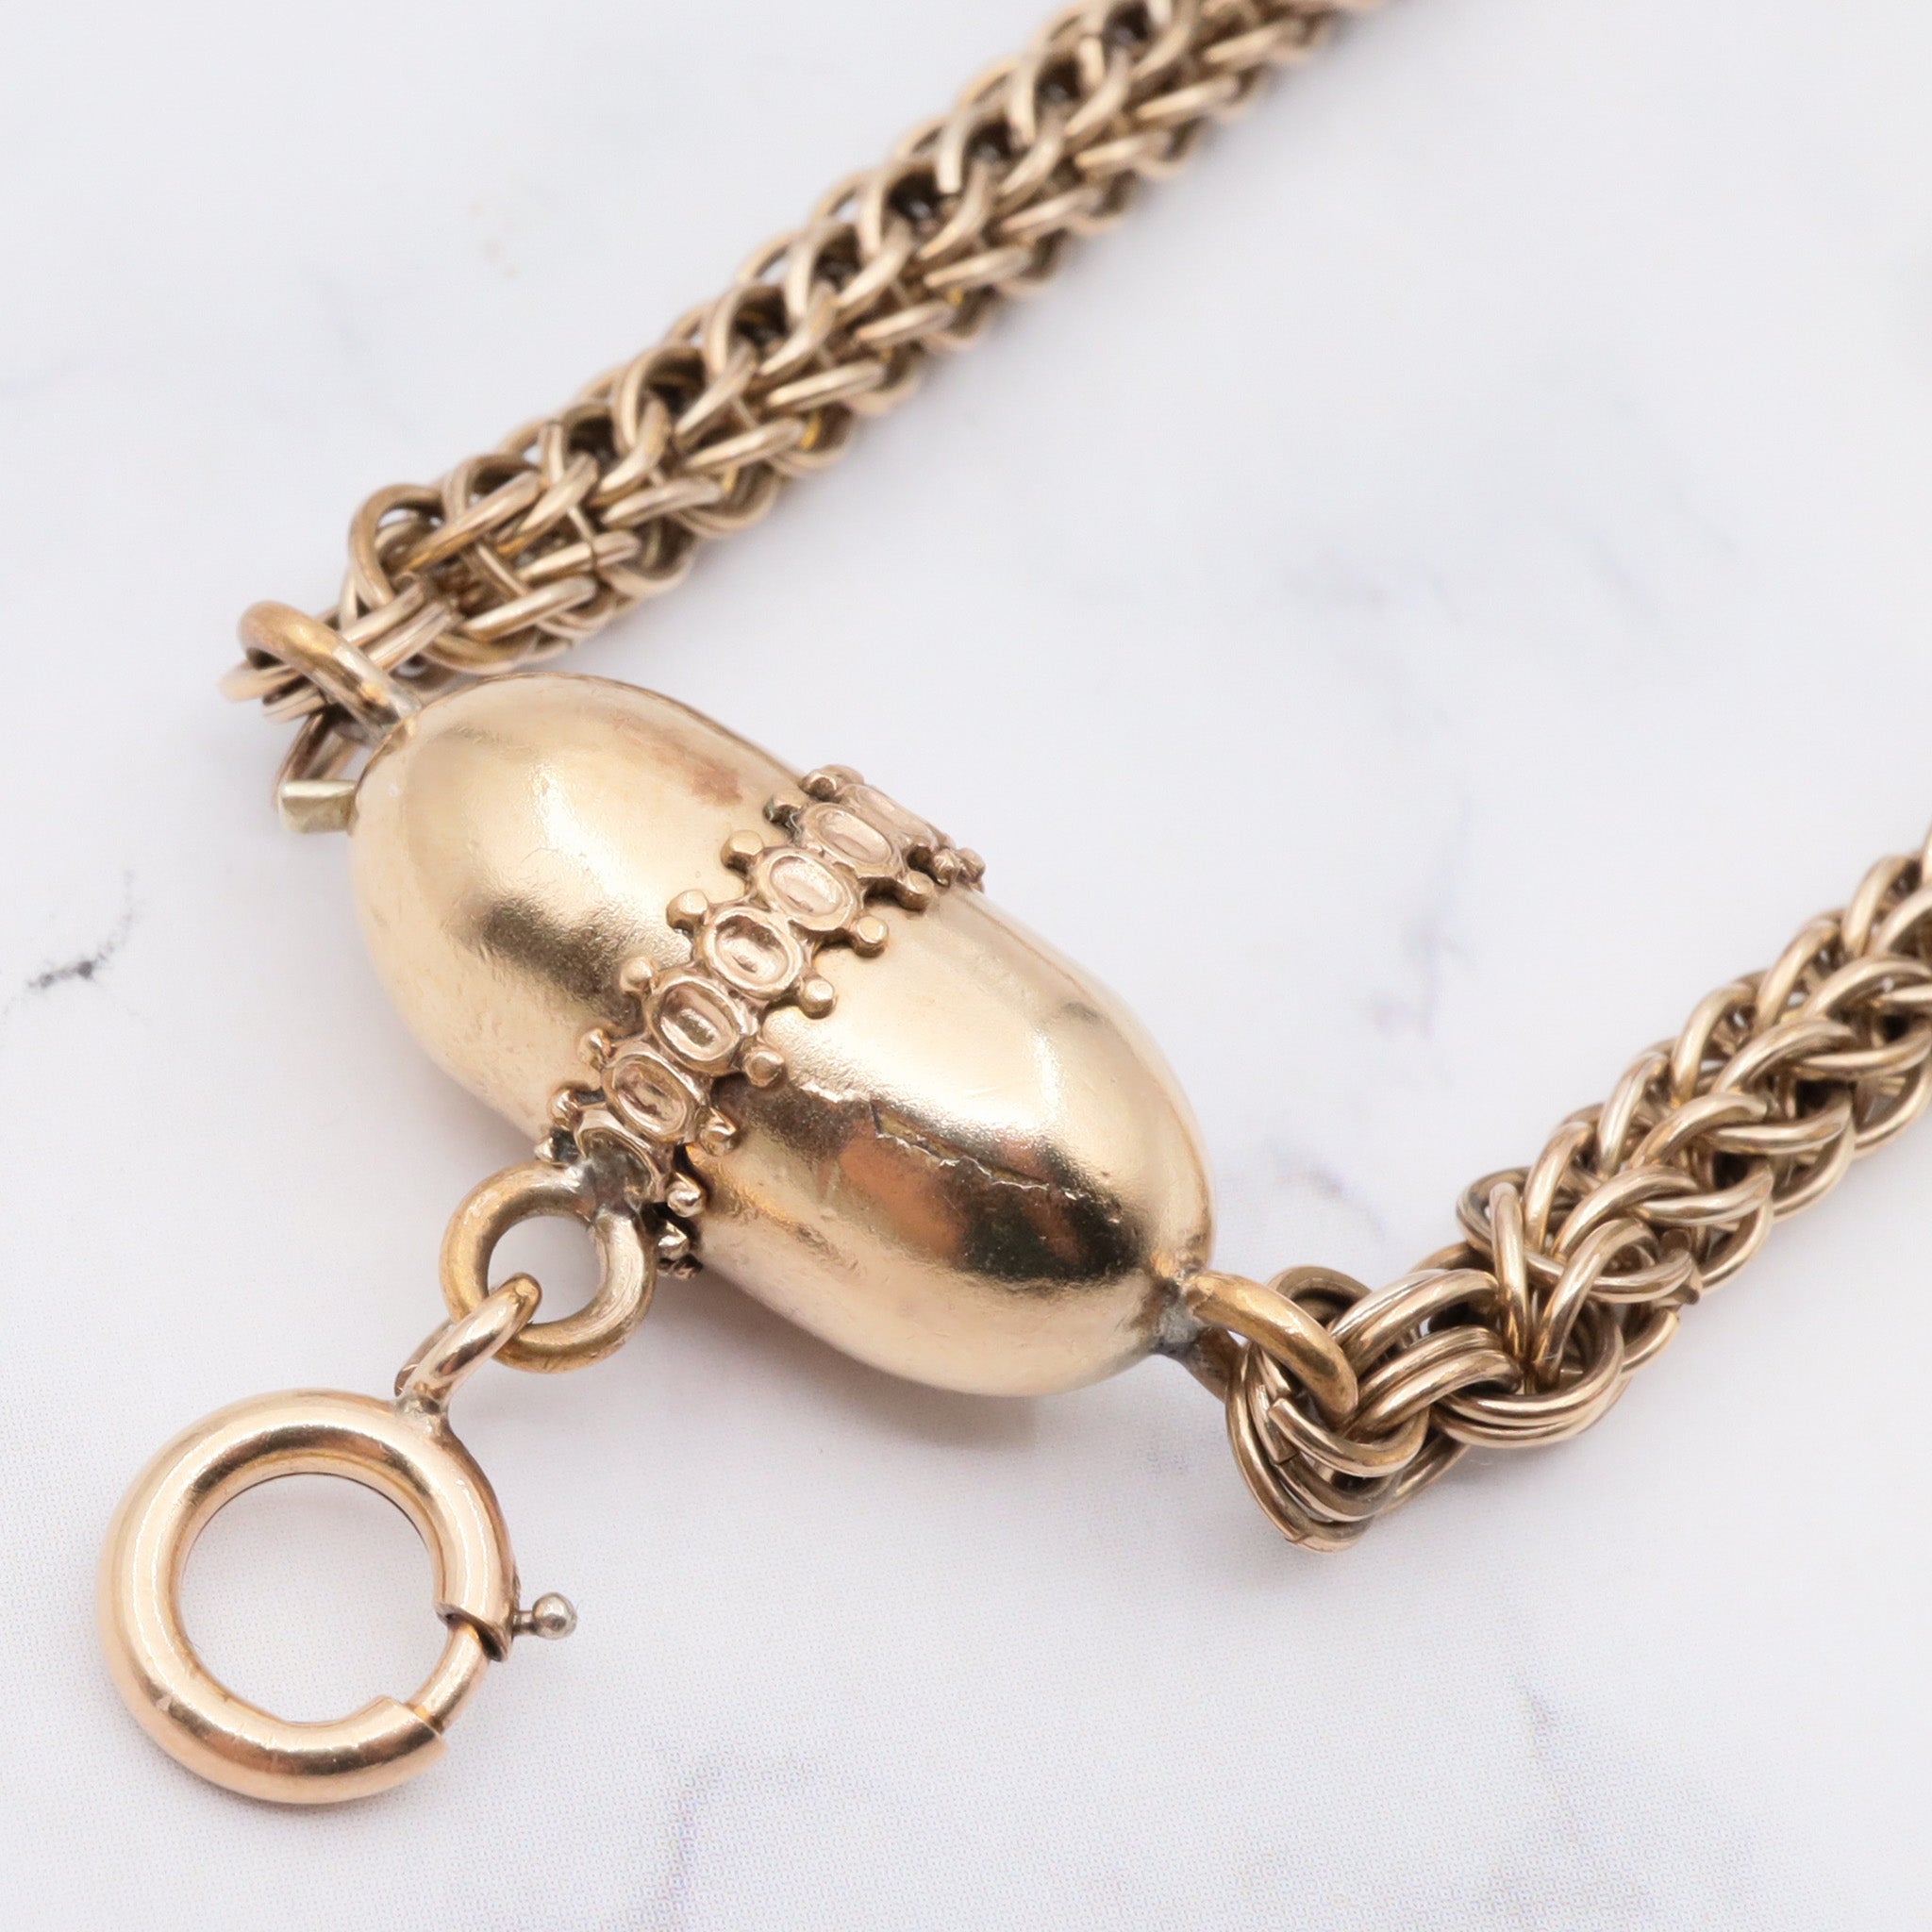 Antique Victorian gold-filled Persian weave chain w/ fancy barrel clasp & spring ring for pendant